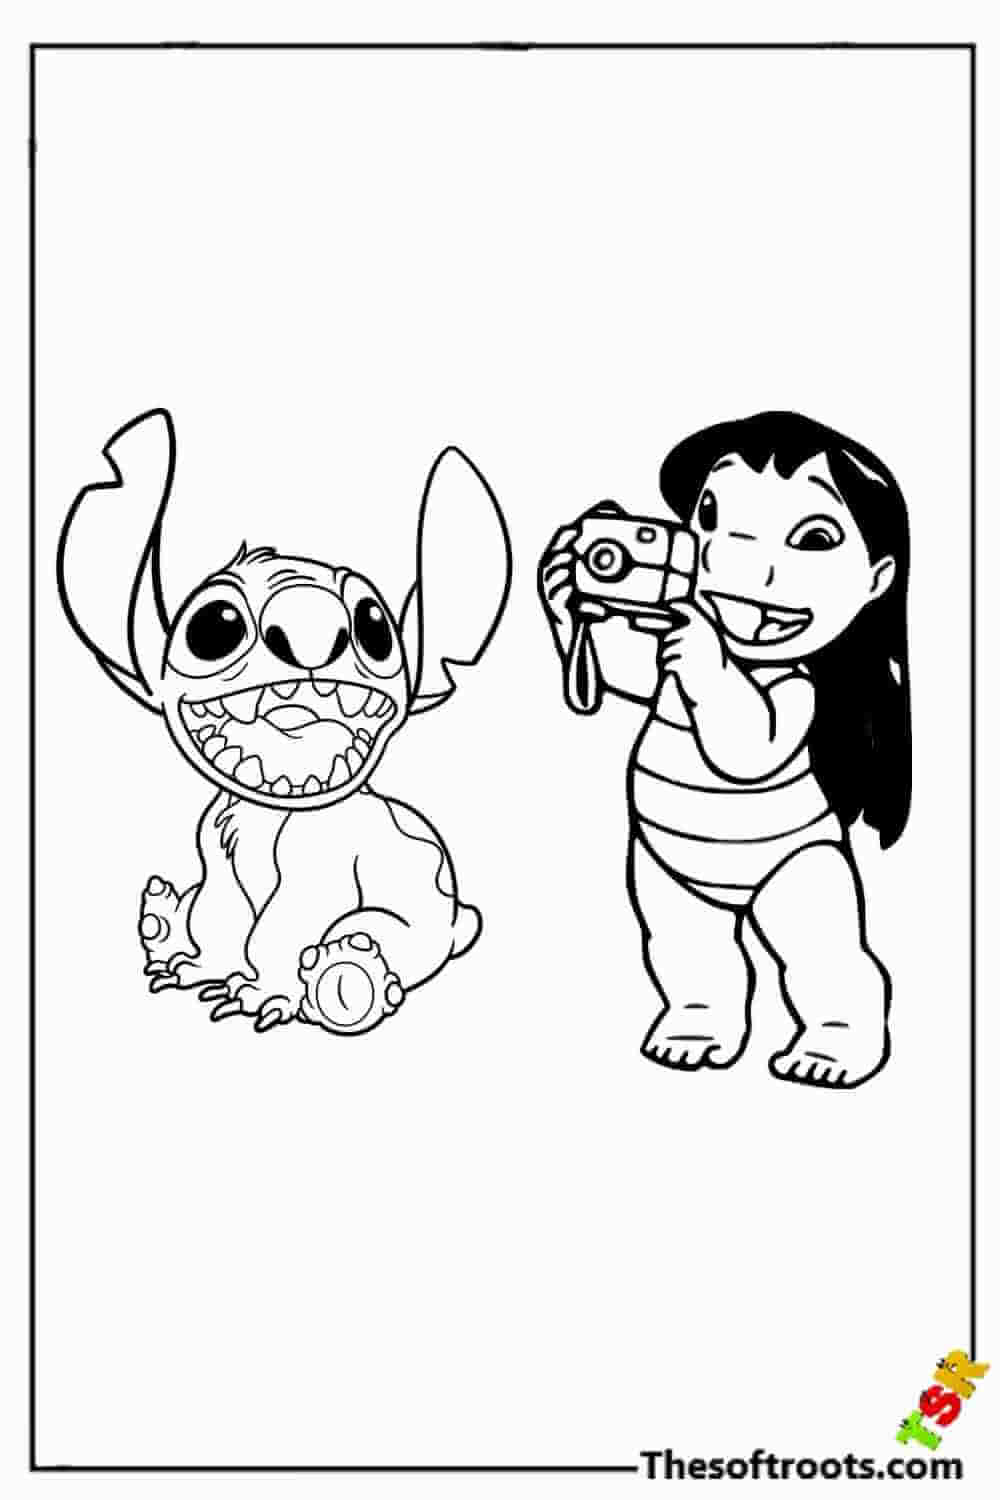 Disney Lilo and Stitch coloring pages